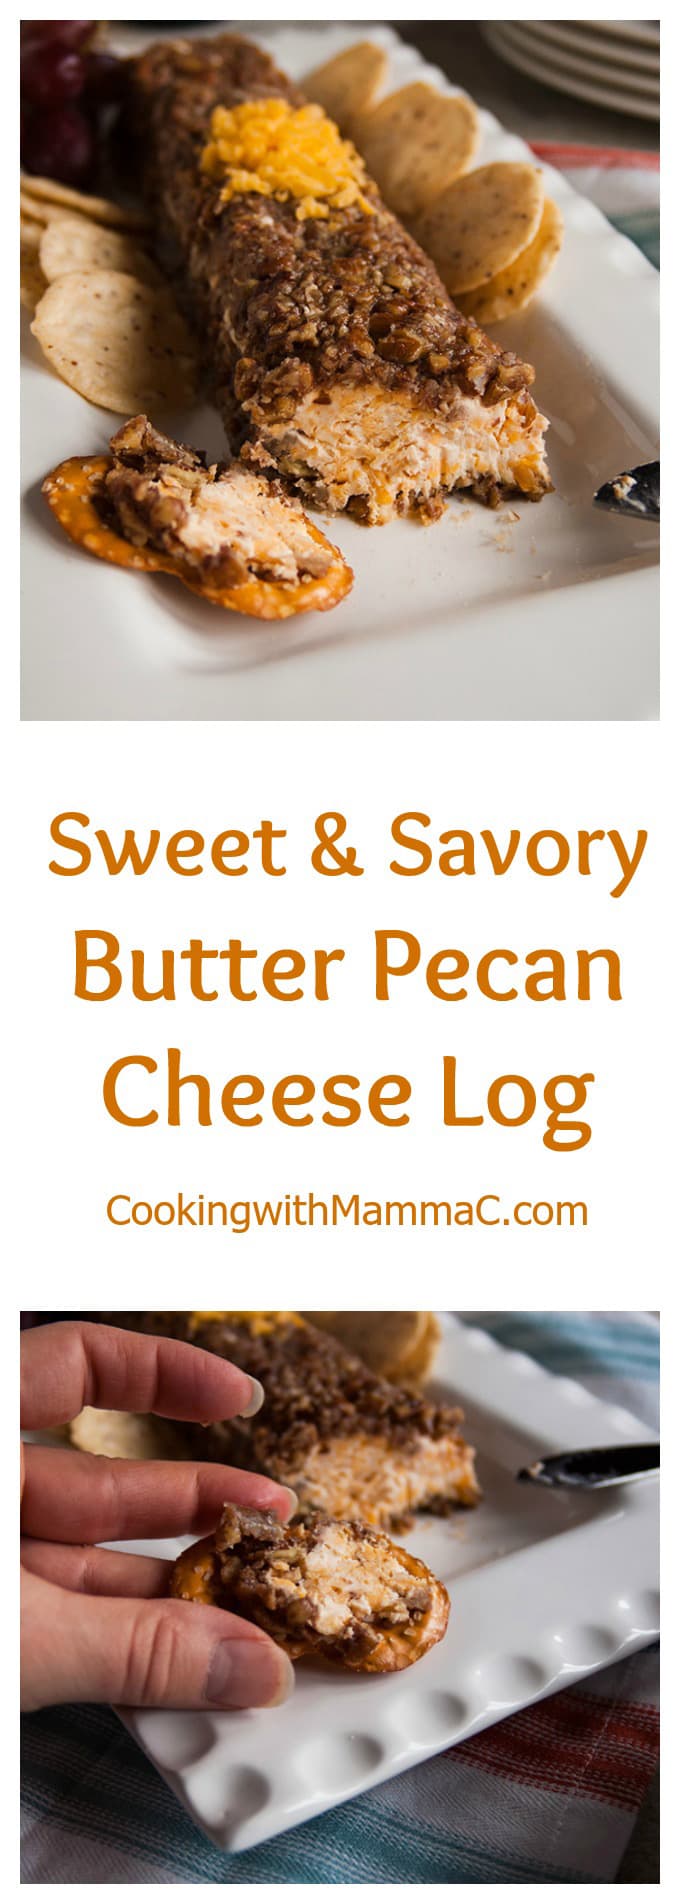 two photos of Sweet and Savory Butter Pecan Cheese Log